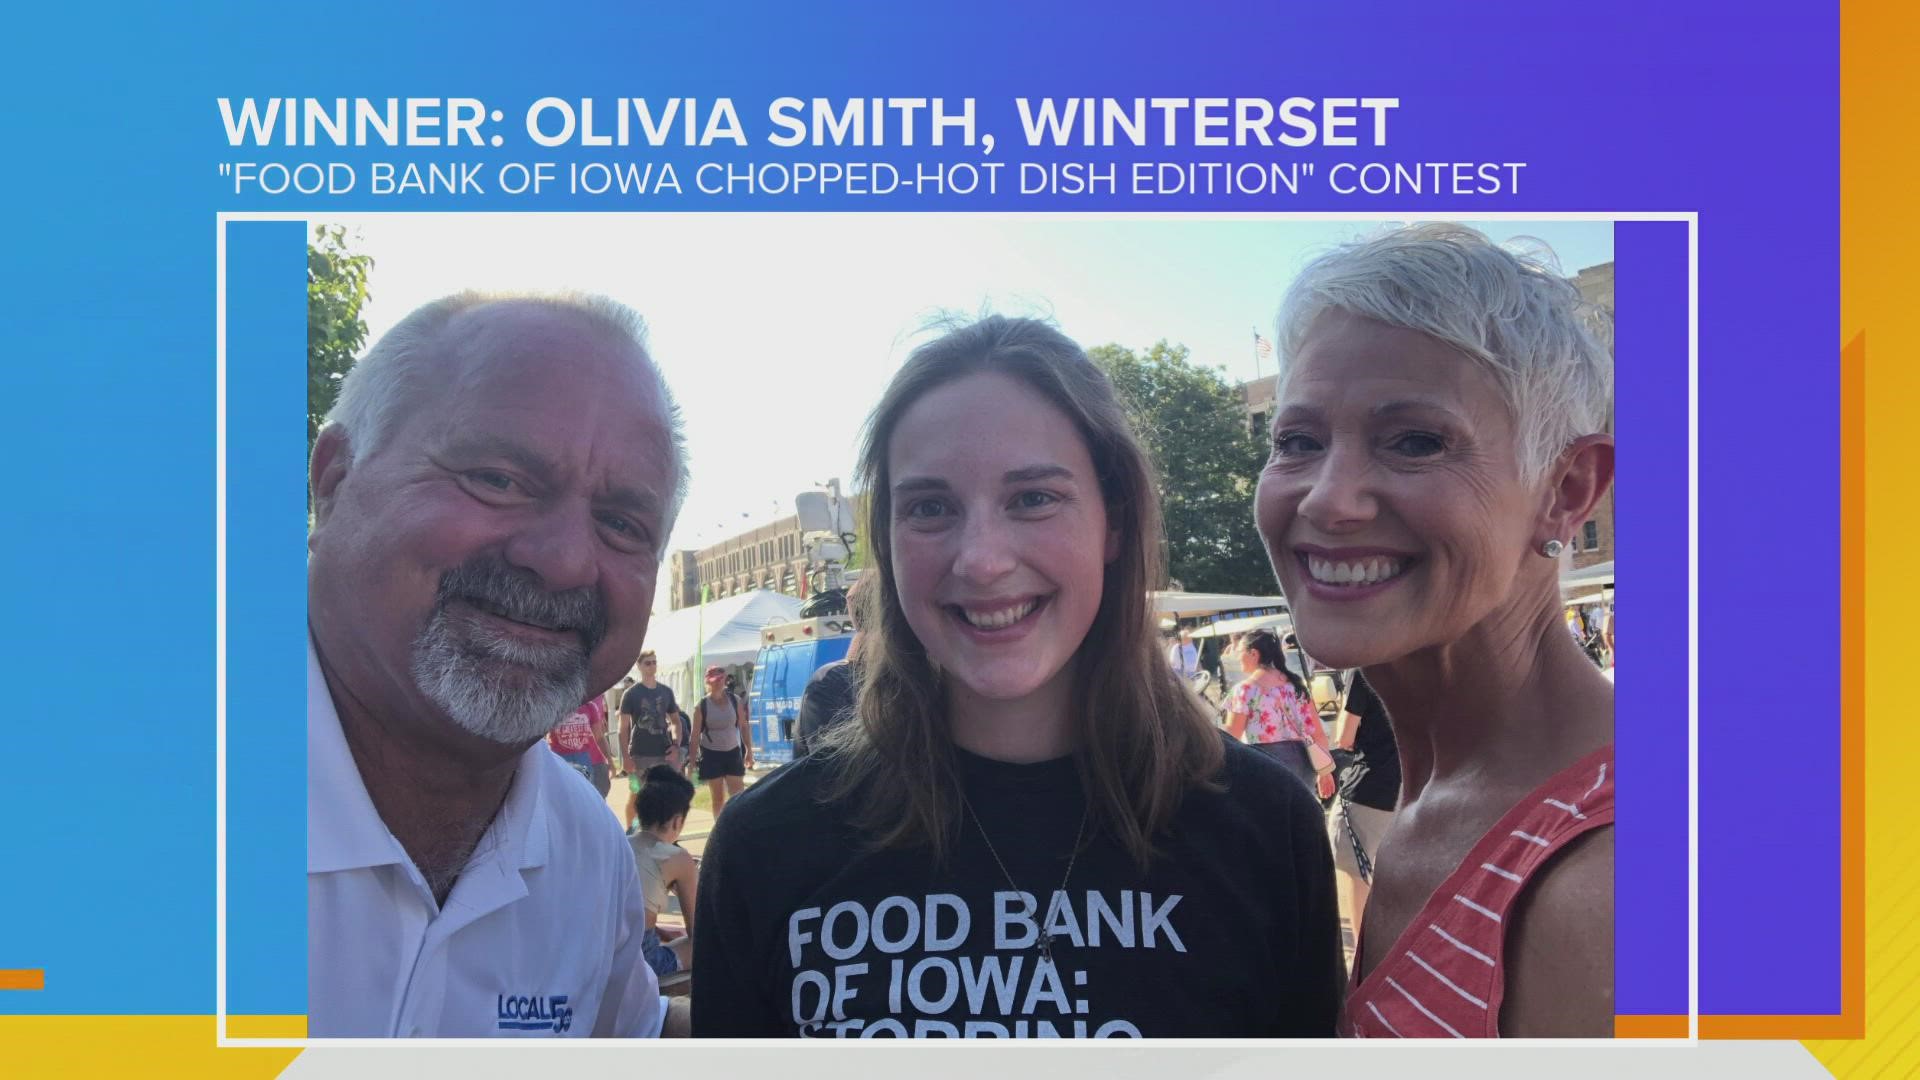 Michelle Book, CEO/President Food Bank of Iowa talks about their food contest at 2021 Iowa State Fair and how it helped create recipe ideas for food pantry clients